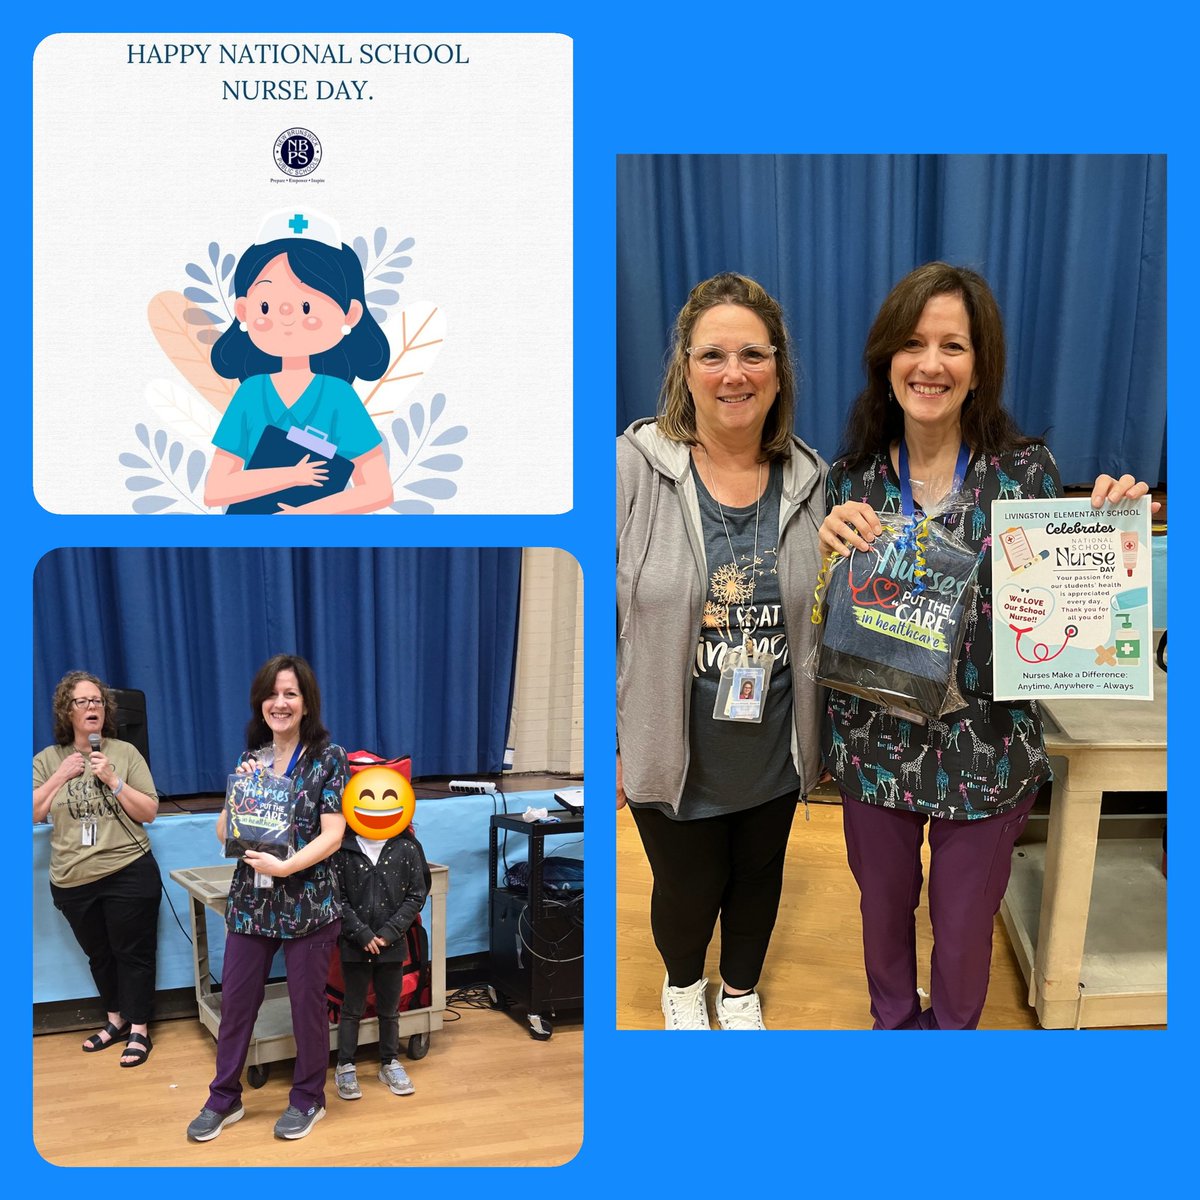 #SchoolNurseDay 
Thank you for your spirit and care!  
Livingston School celebrates Nurse Wournell! 🦁
#LVPride @nbpschools